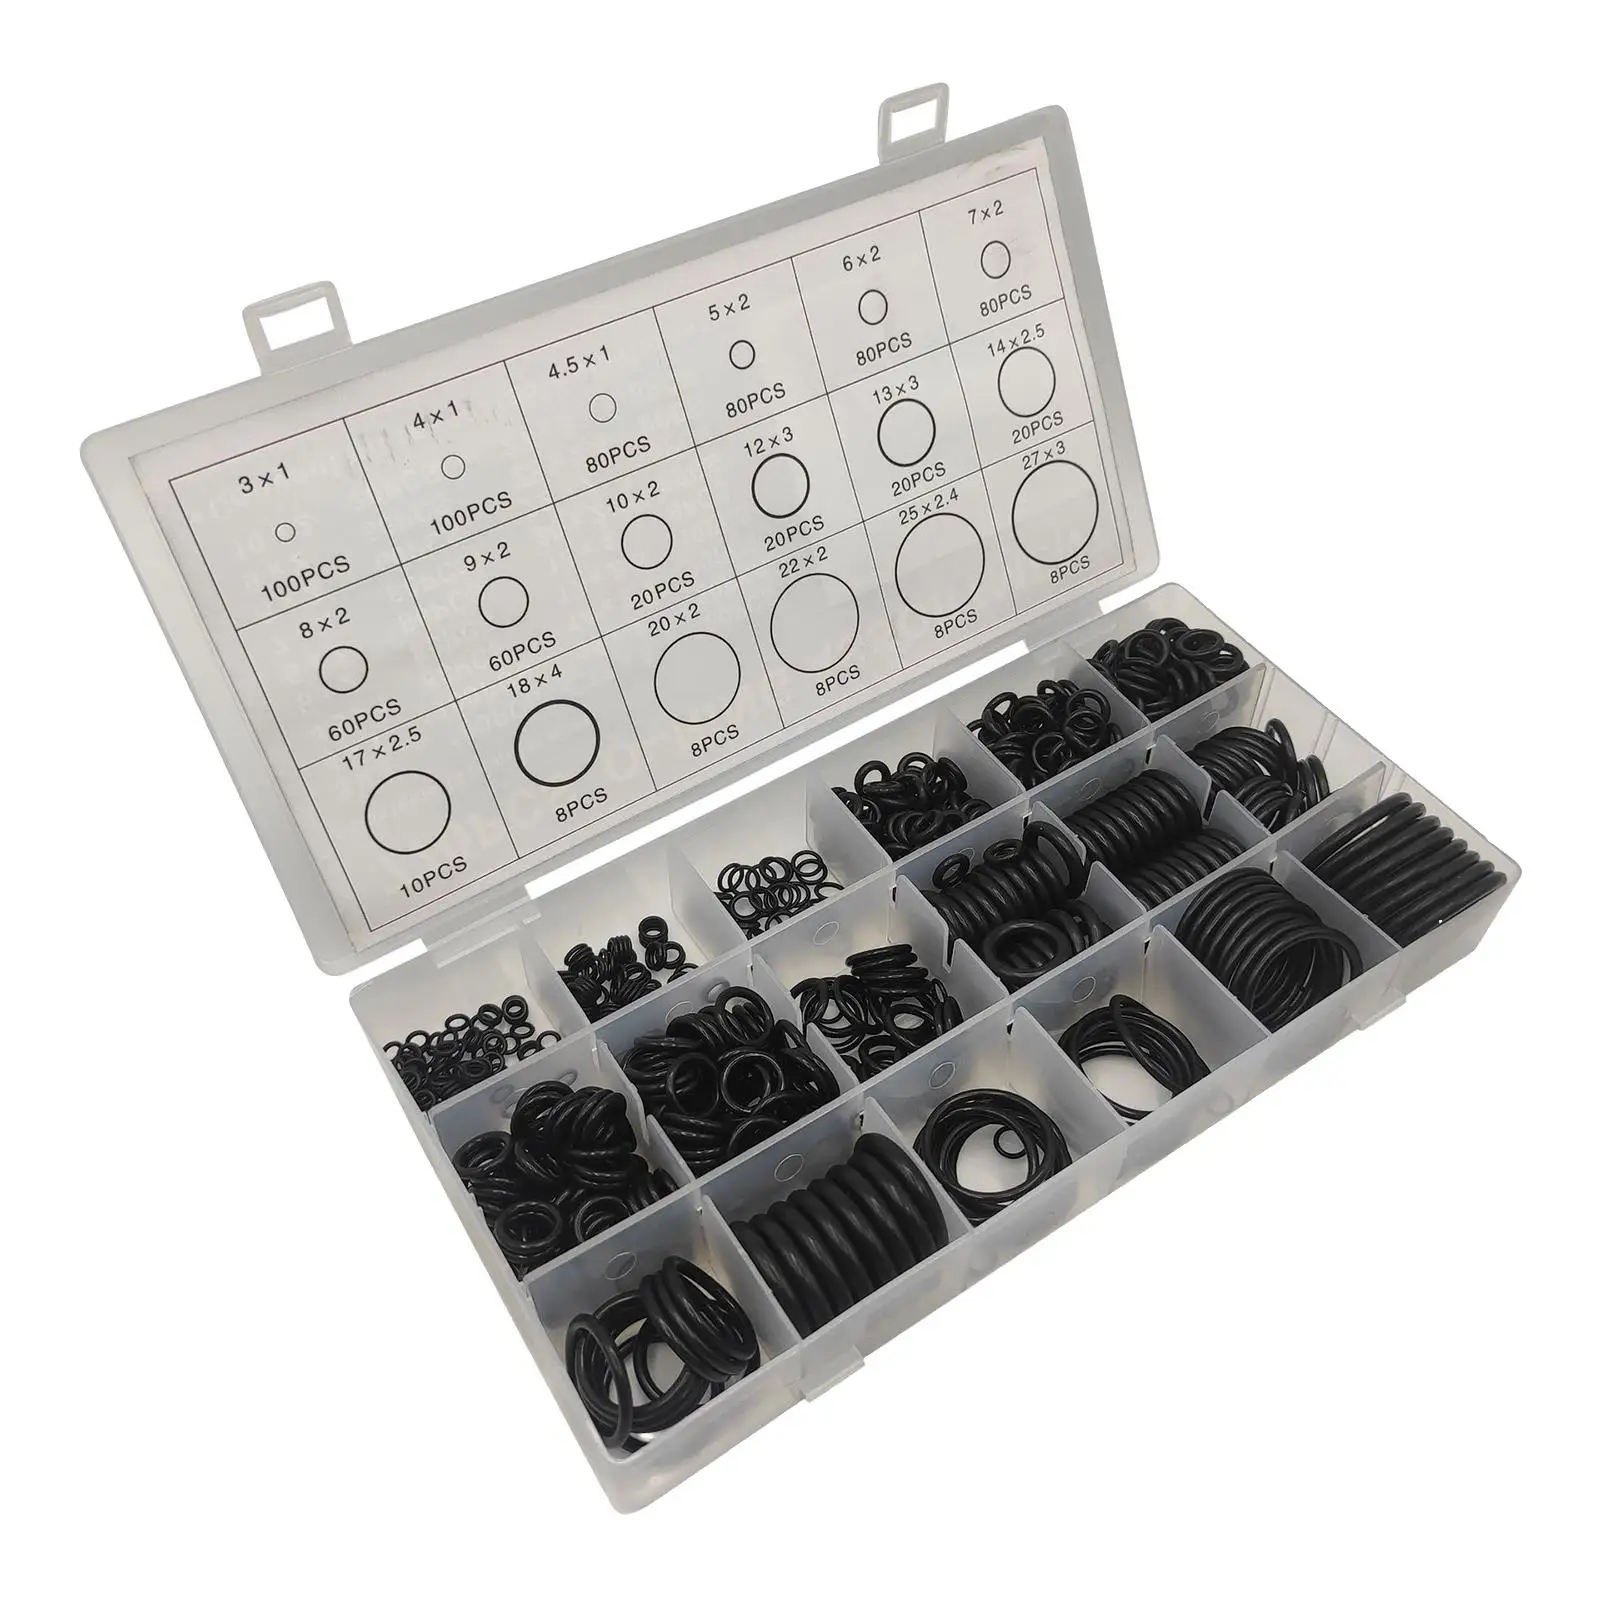 O Rings Assortment kit with Storage Box Black for Auto Quick Repair